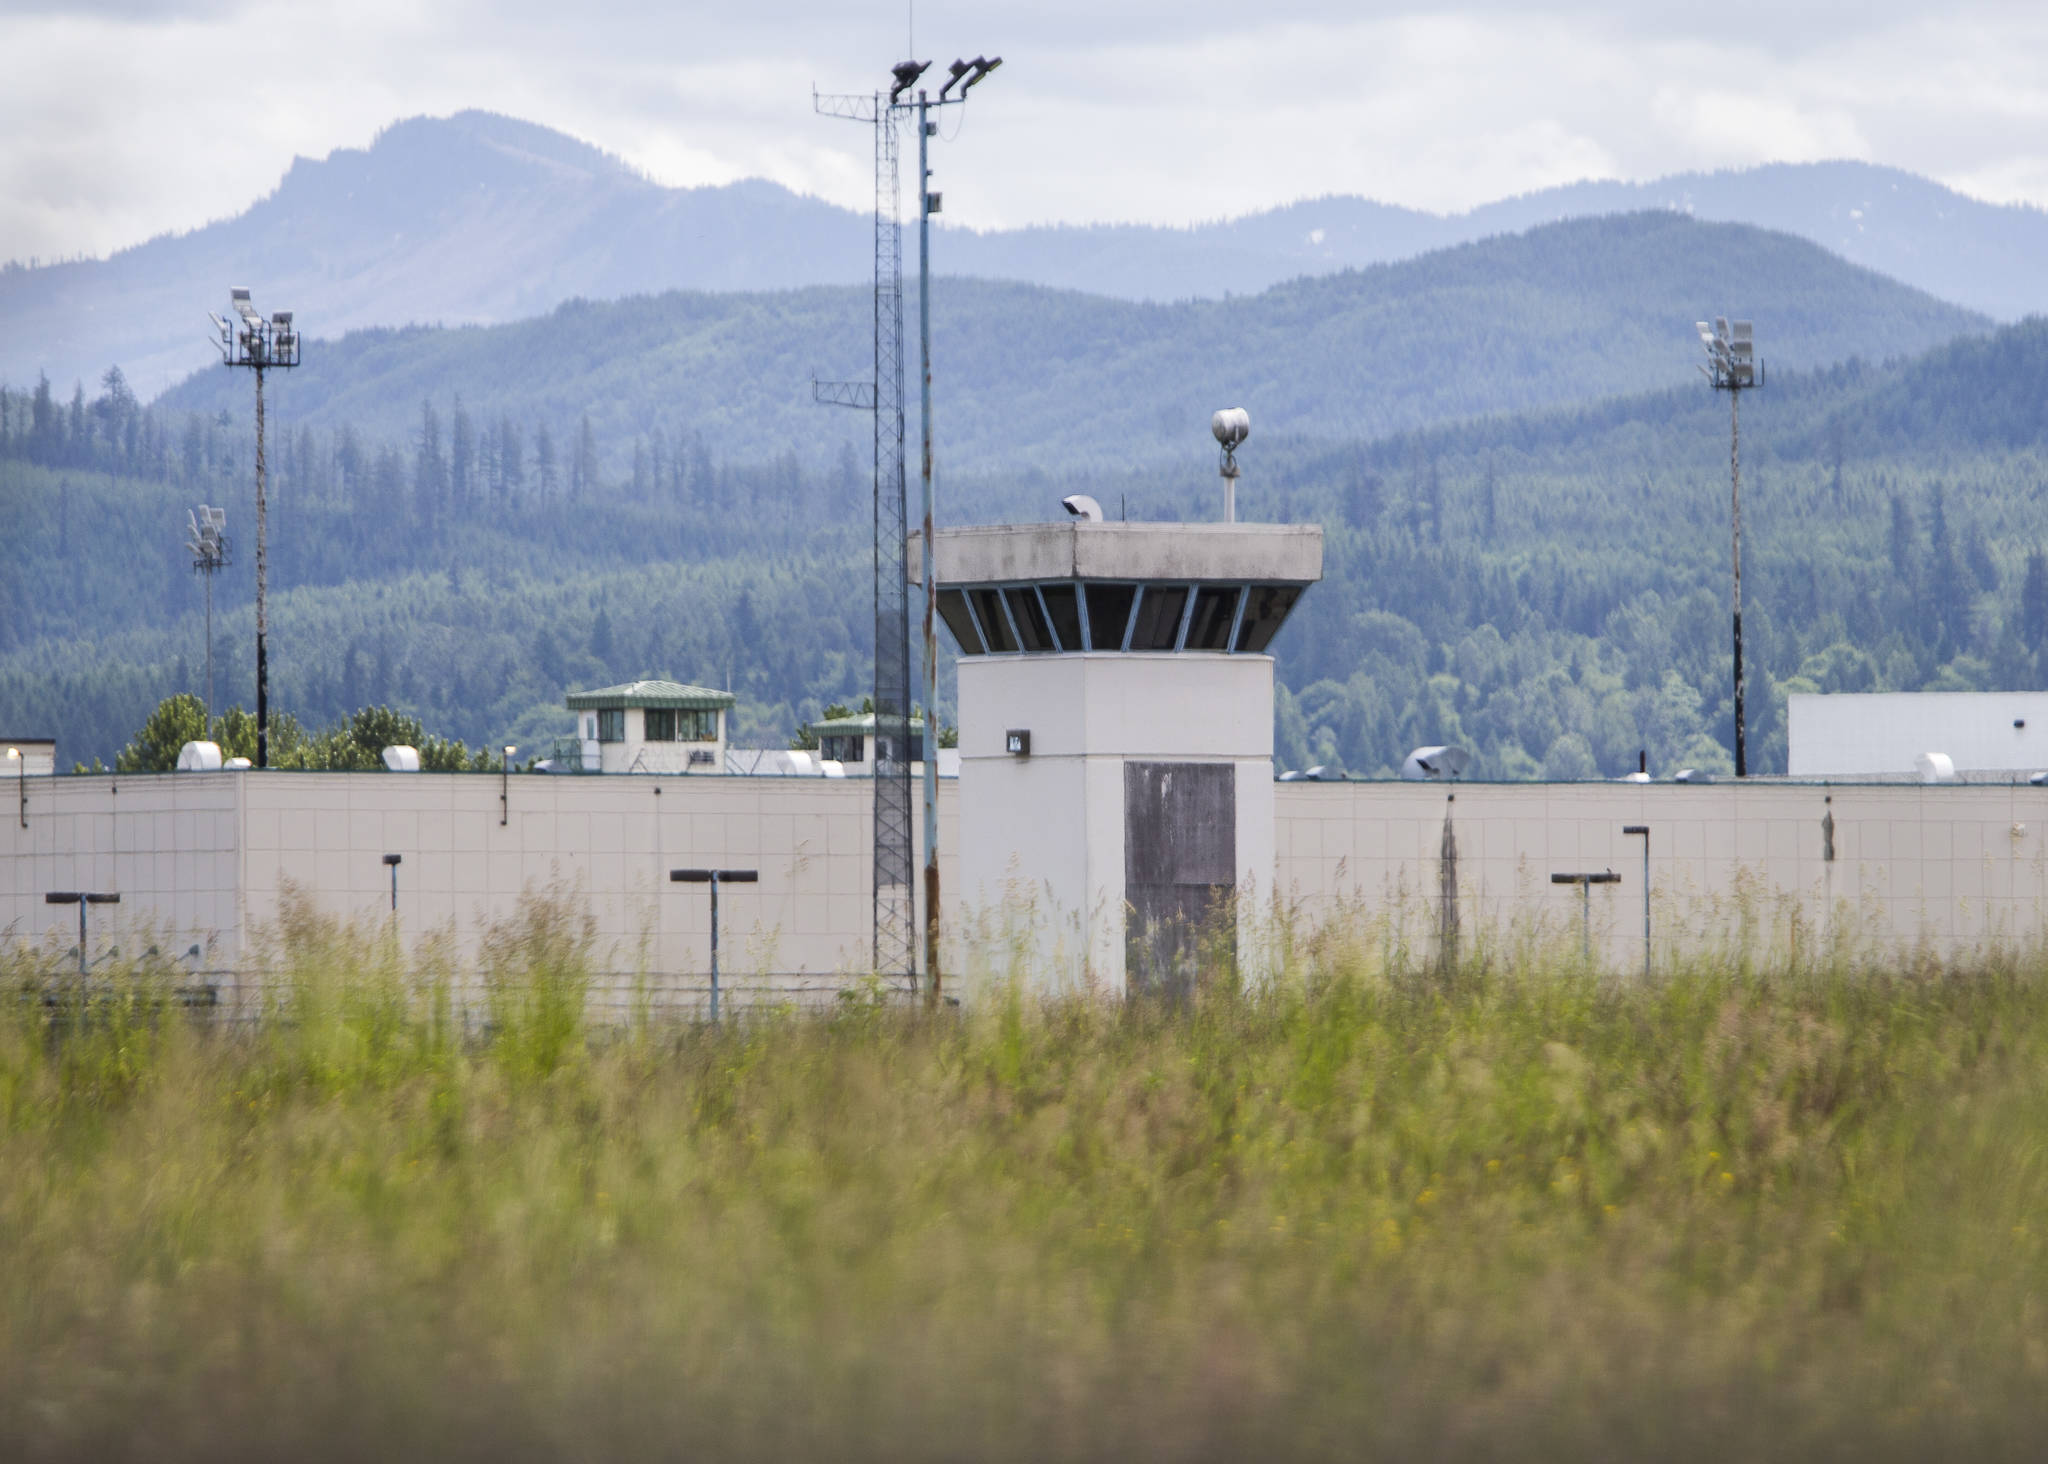 Prison officials report that 392 of the 2,488 beds at the Monroe Correctional Complex are not occupied. (Olivia Vanni / The Herald)